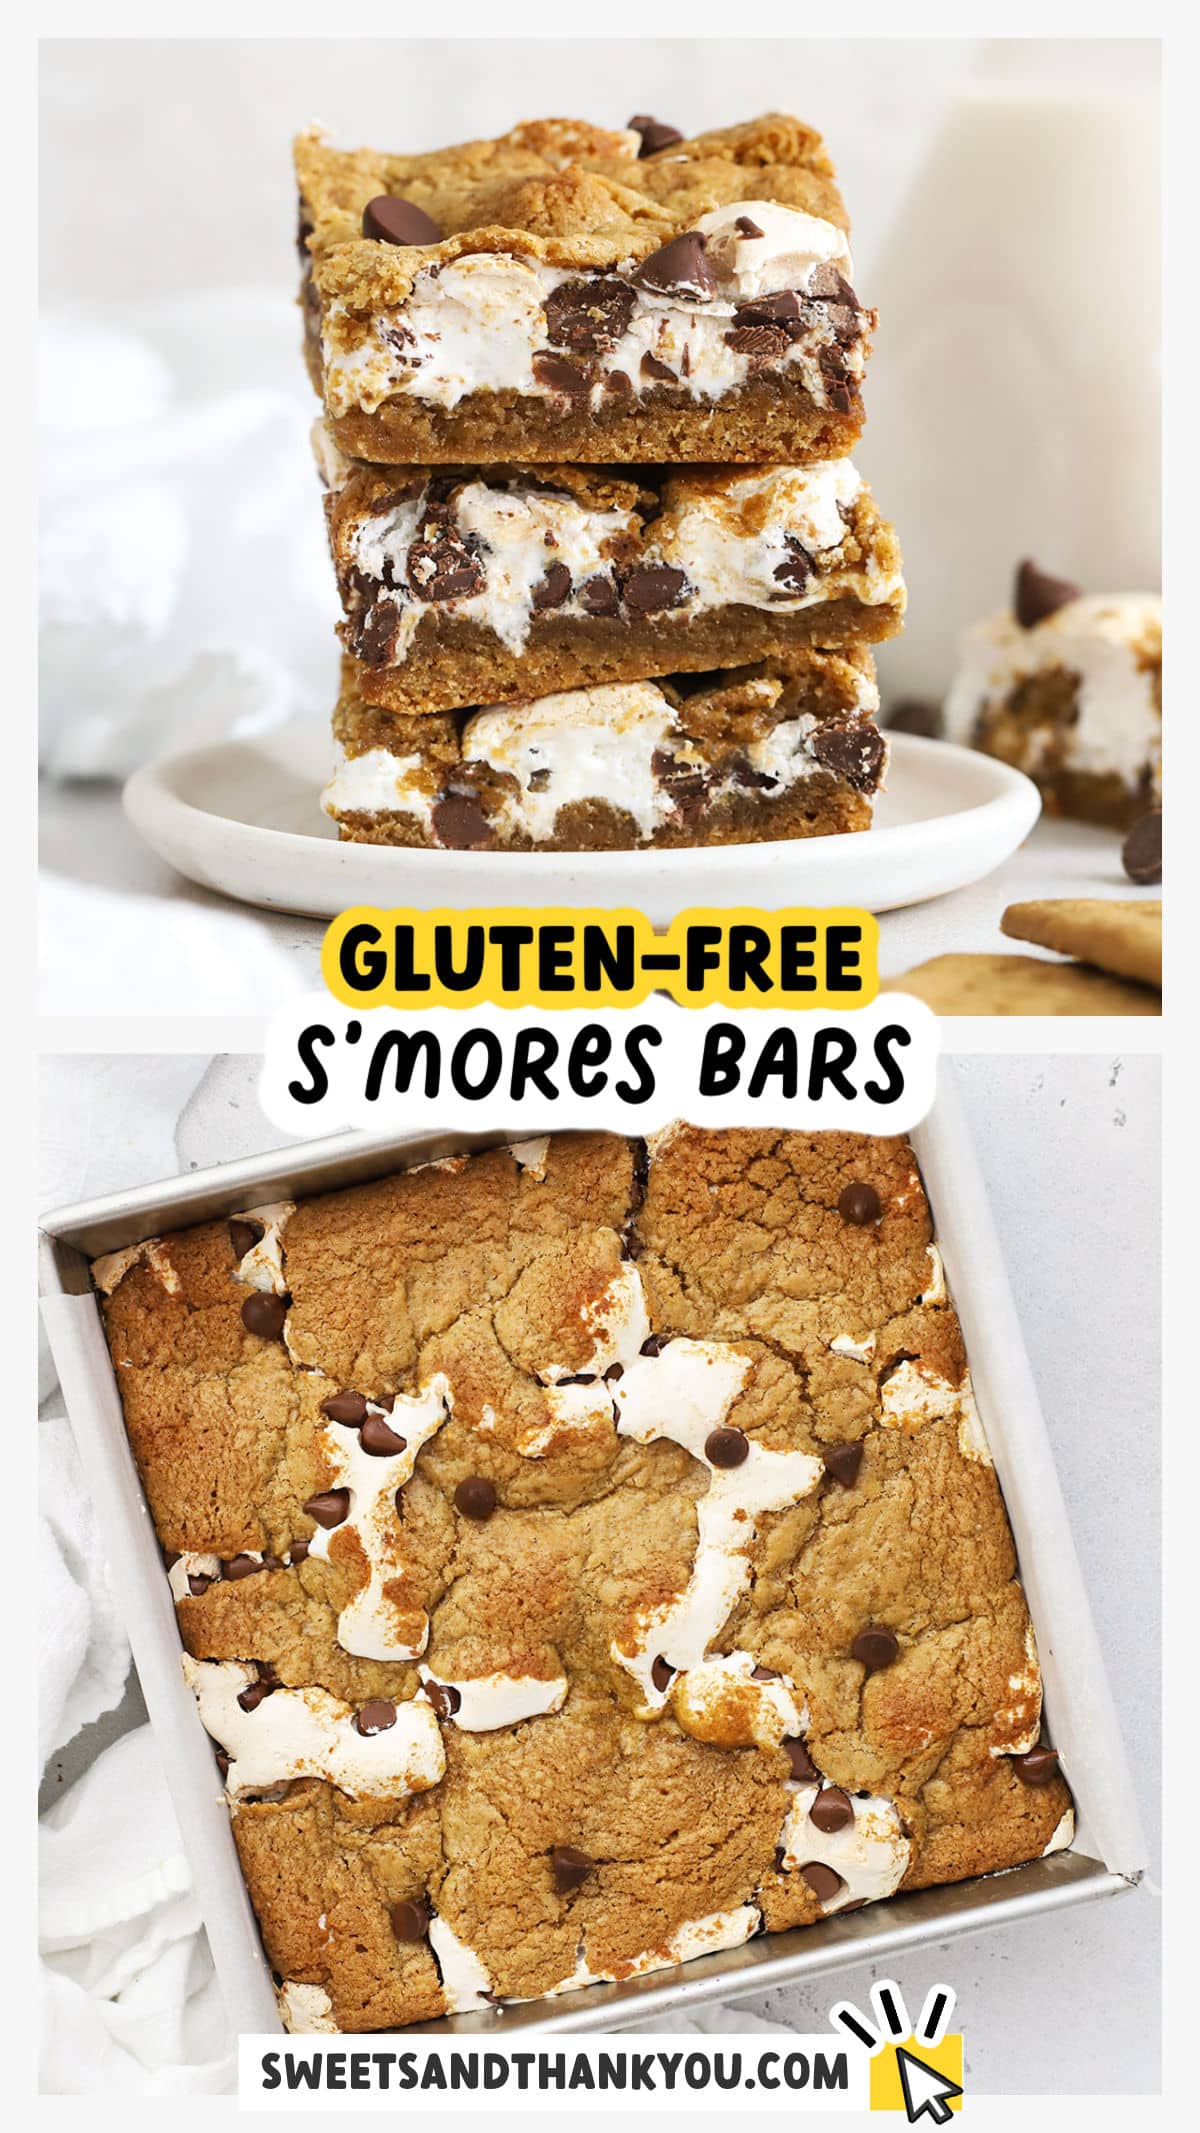 Soft, chewy gluten-free s'mores bars made with gooey marshmallow and melty chocolate between two layers of graham cookie. Yum! These gluten-free s'mores cookie bars are a fun summer dessert that channels the classic flavor of a s'more into a delicious cookie bar! Get the recipe at Sweets & Thank You